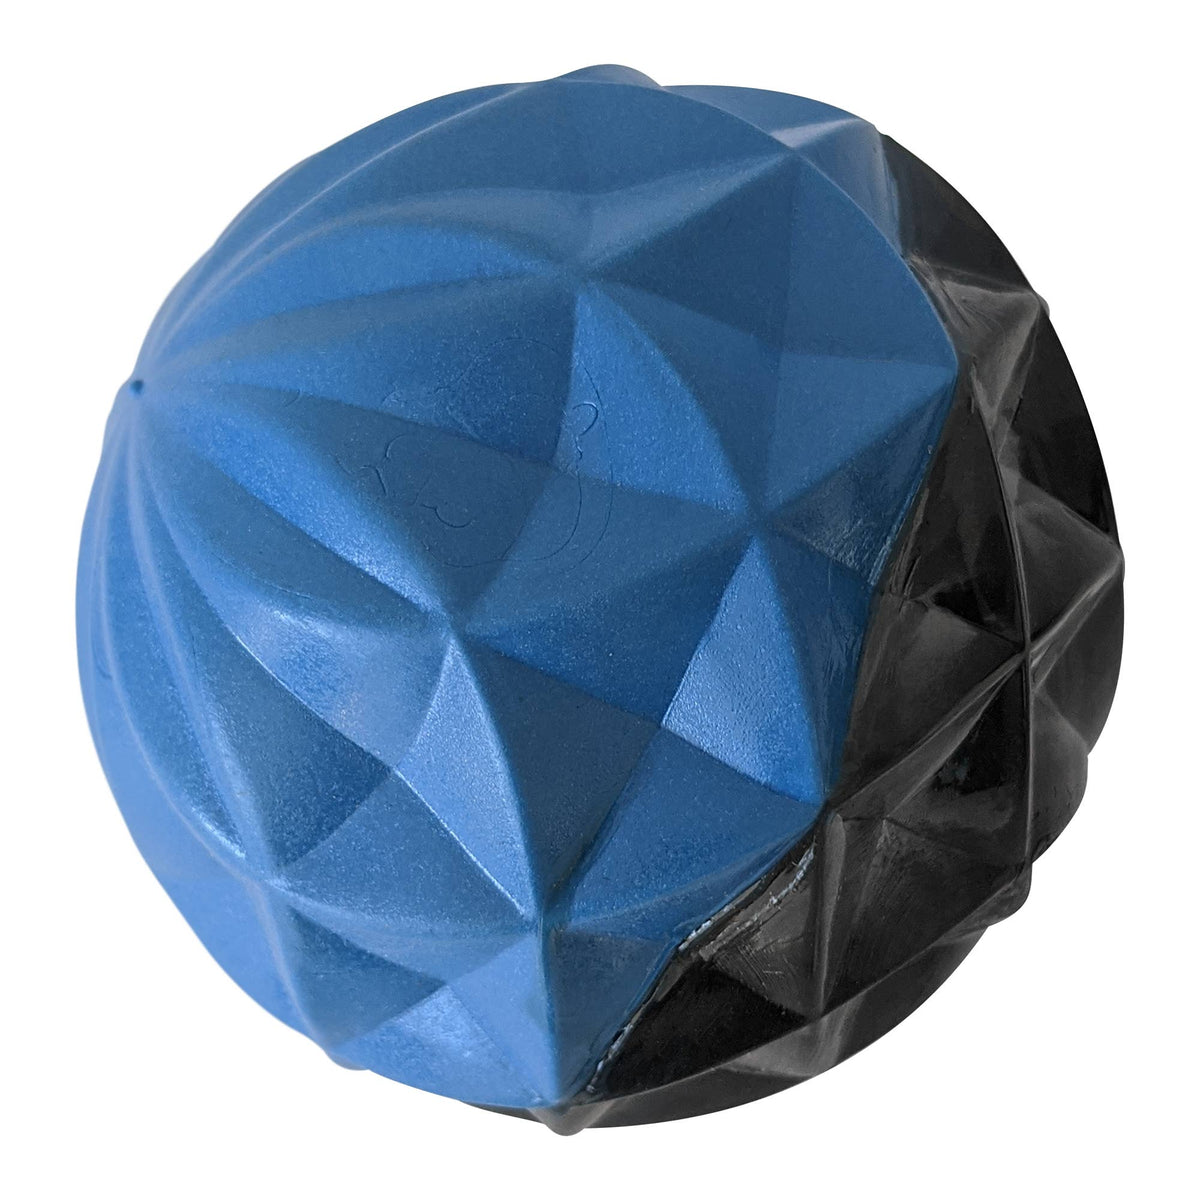 Geometric Design Textured Ball Dog Chew Toy - Large by American Pet Supplies